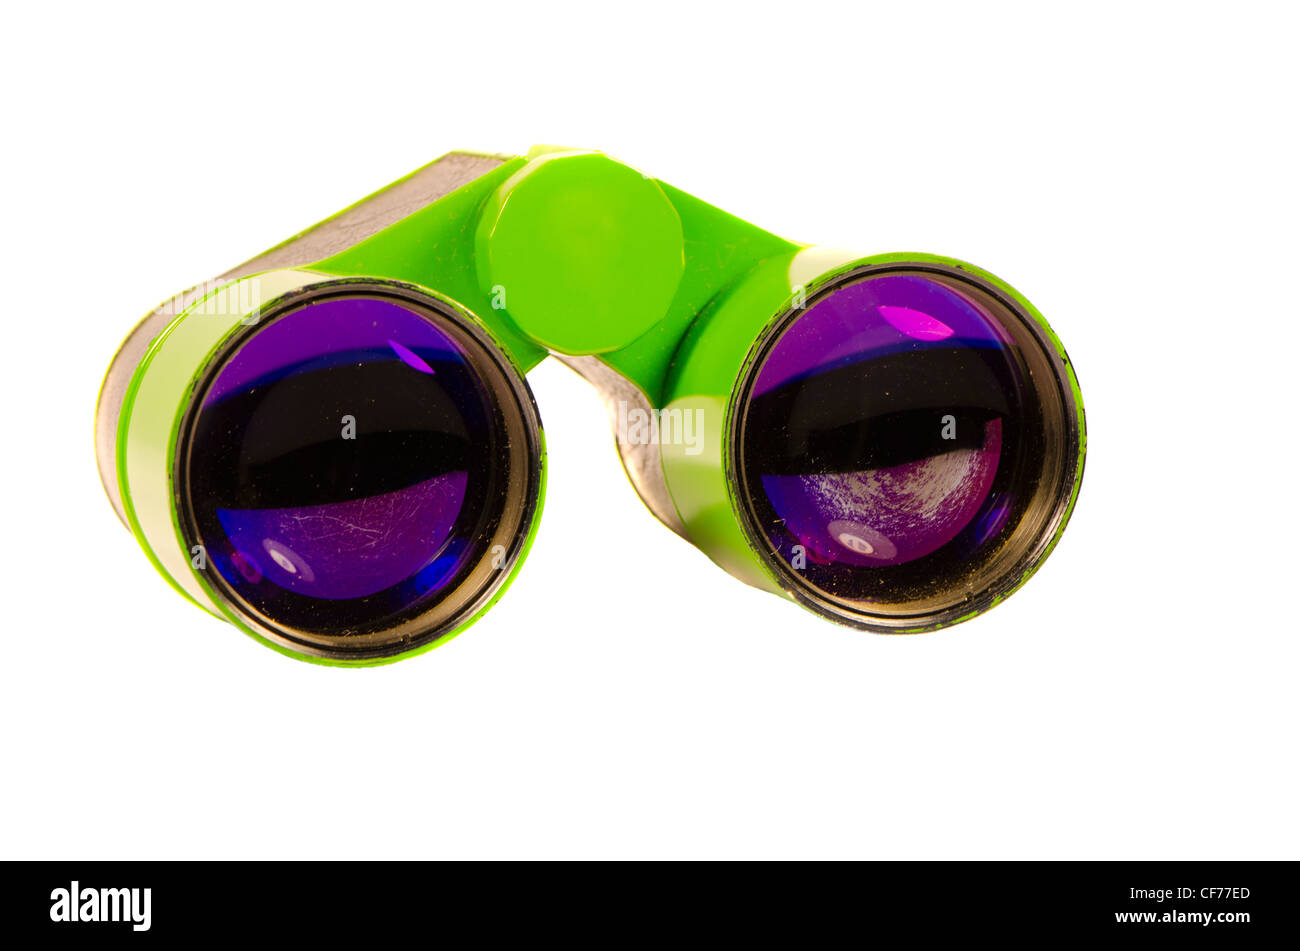 Theater binoculars for distance zoom view. Green toy isolated on white background. Stock Photo